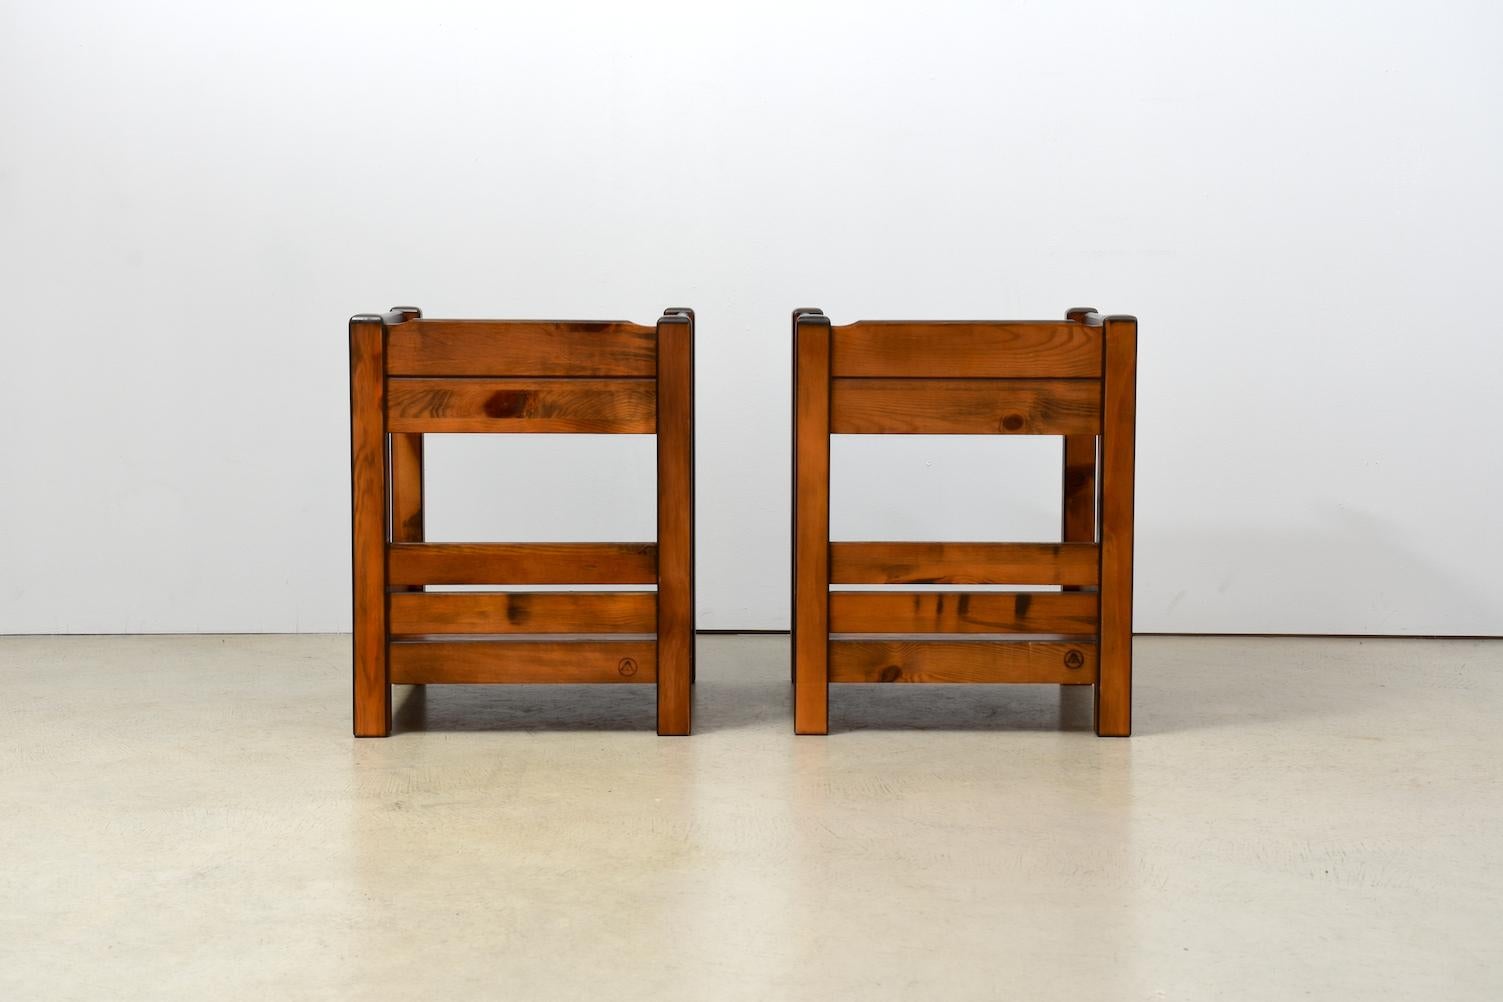 Balkan 2 Identical Bedside Tables, 1970s from Former Yugoslavia, Stained Pine Wood For Sale